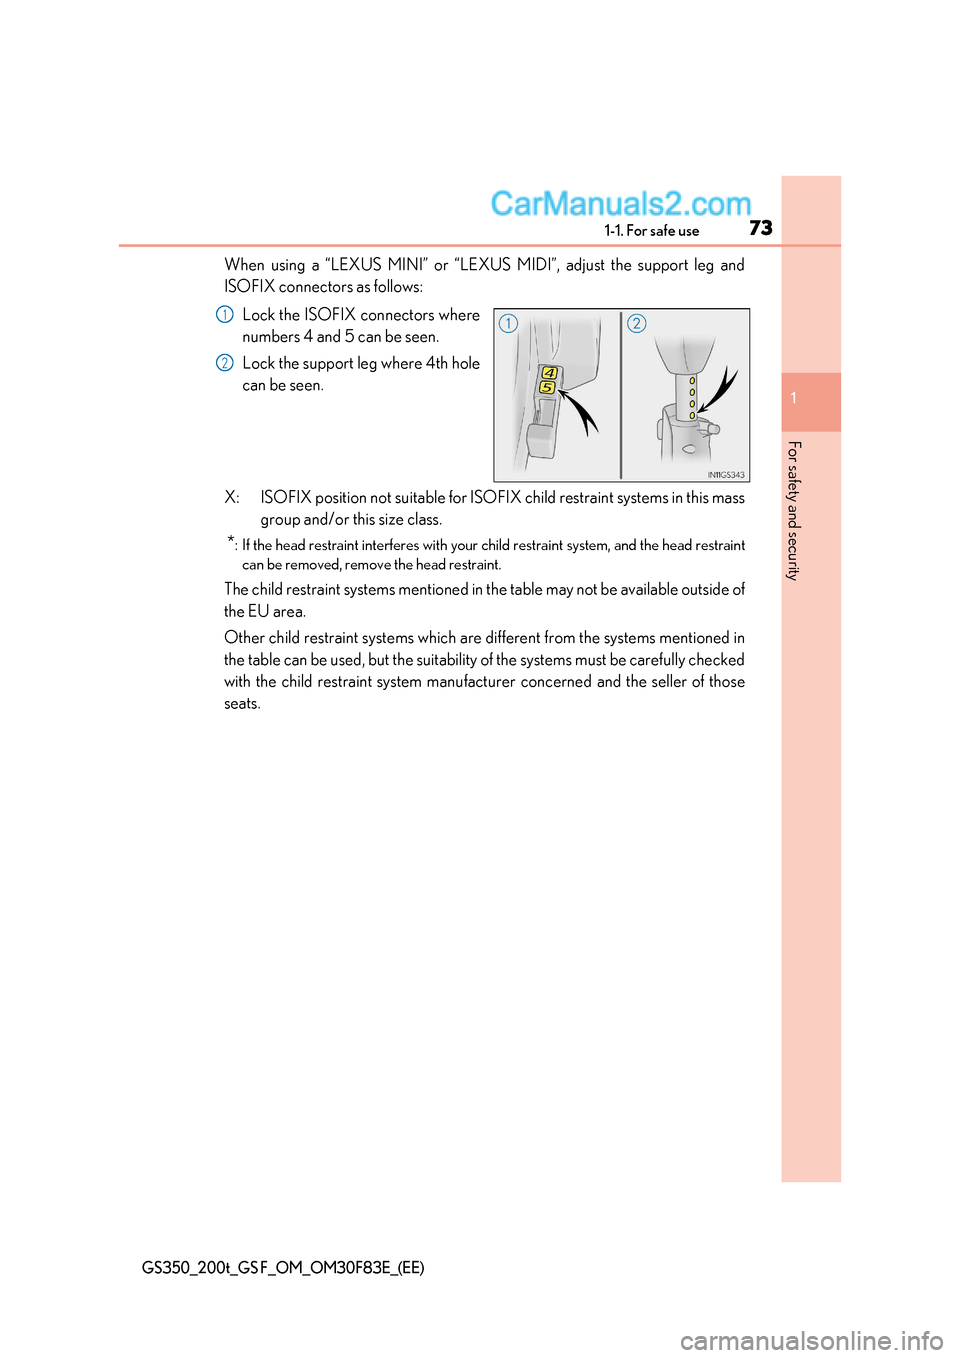 Lexus GS200t 2017  Owners Manual 73
1-1. For safe use
1
For safety and security
GS350_200t_GS F_OM_OM30F83E_(EE)
When using a “LEXUS MINI” or “LEXUS MIDI”, adjust the support leg and 
ISOFIX connectors as follows:
Lock the IS